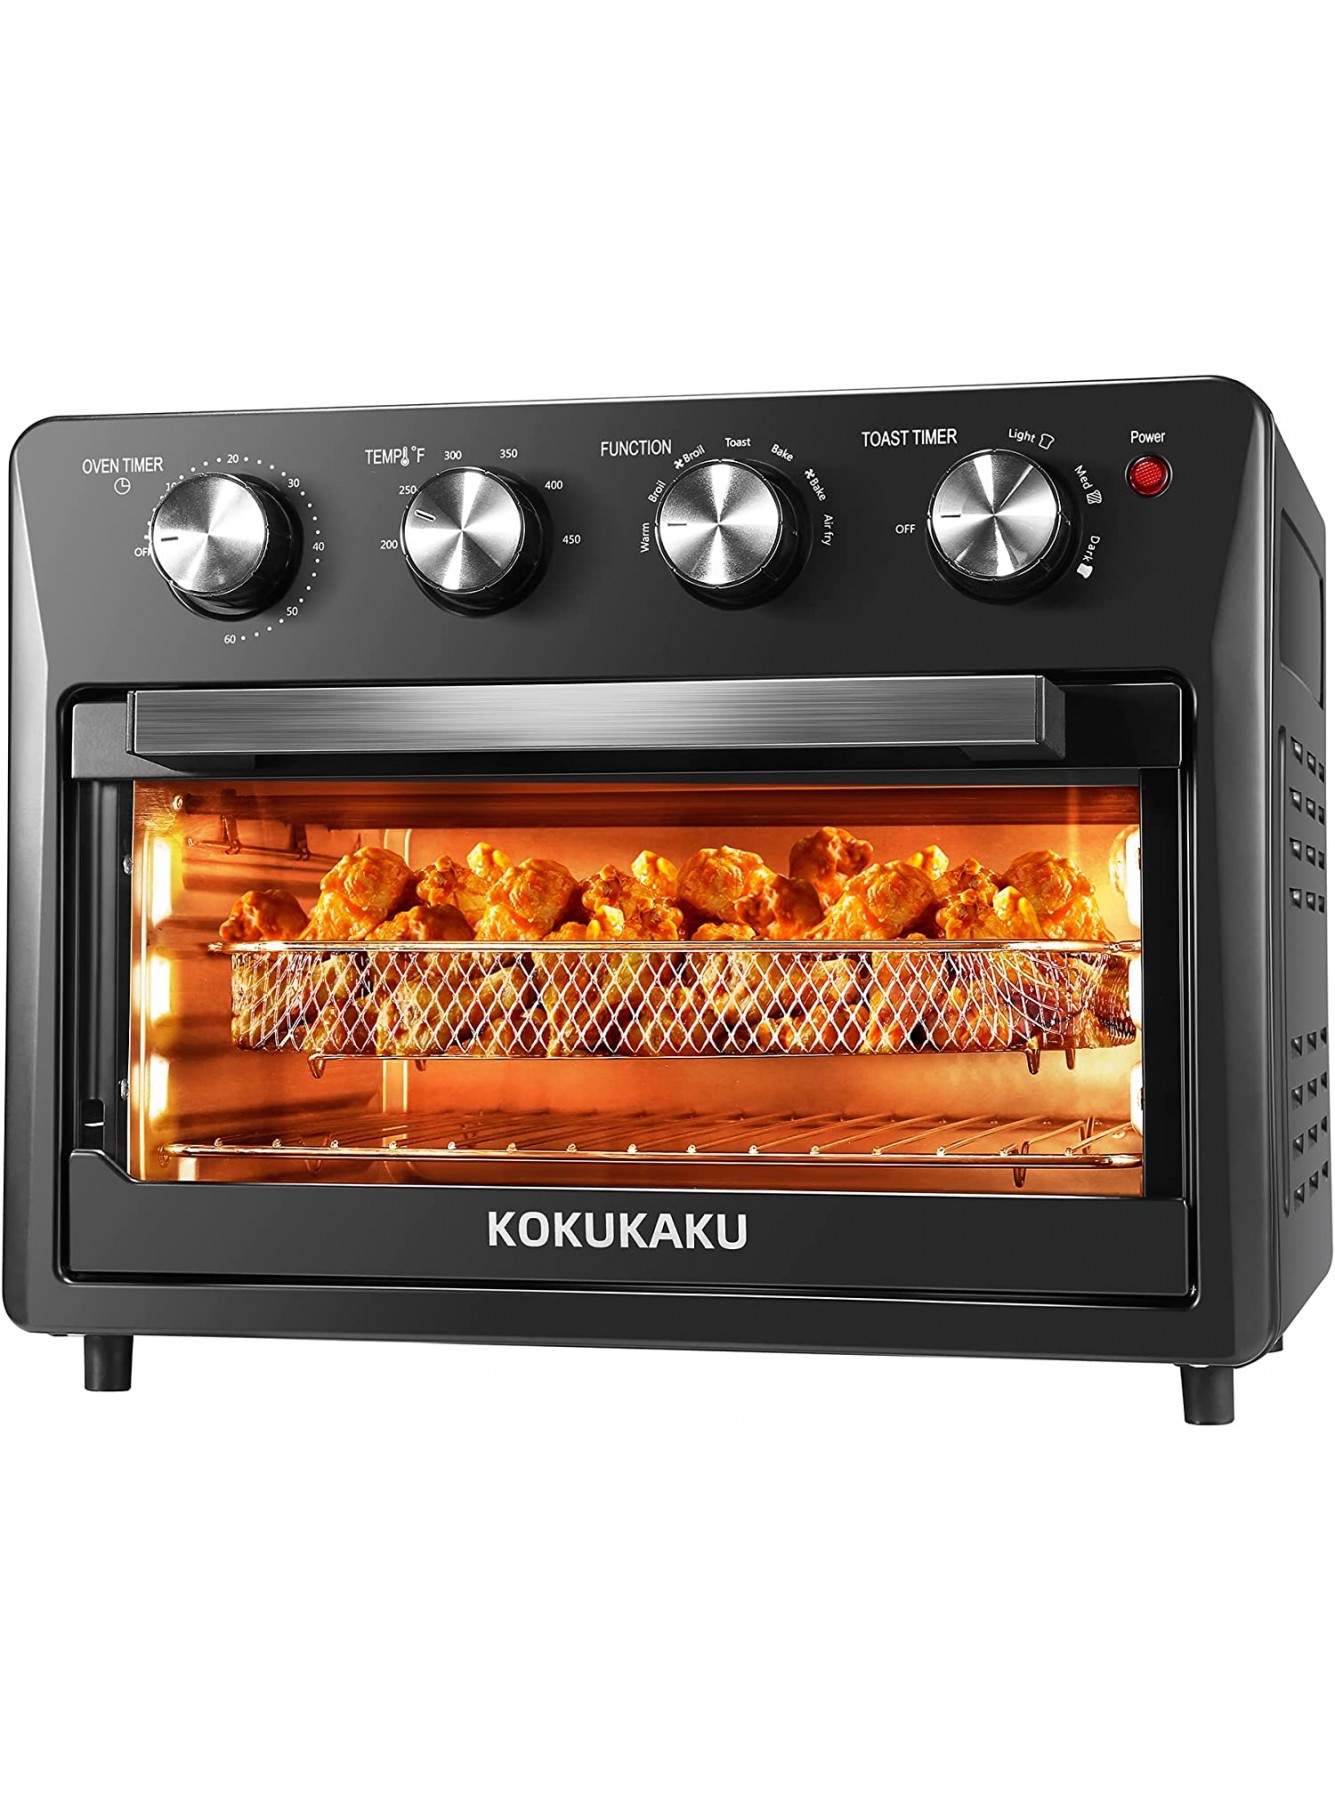 KOKUKAKU Air Fryer Toaster Oven Combos 25QT 7-in-1 Air Fryer Roast Bake Broil Reheat Dehydrator 5 Accessories Included Large Convection Countertop Oven 1700W ETL Listed DK-FO23B Black B09Q34H38M